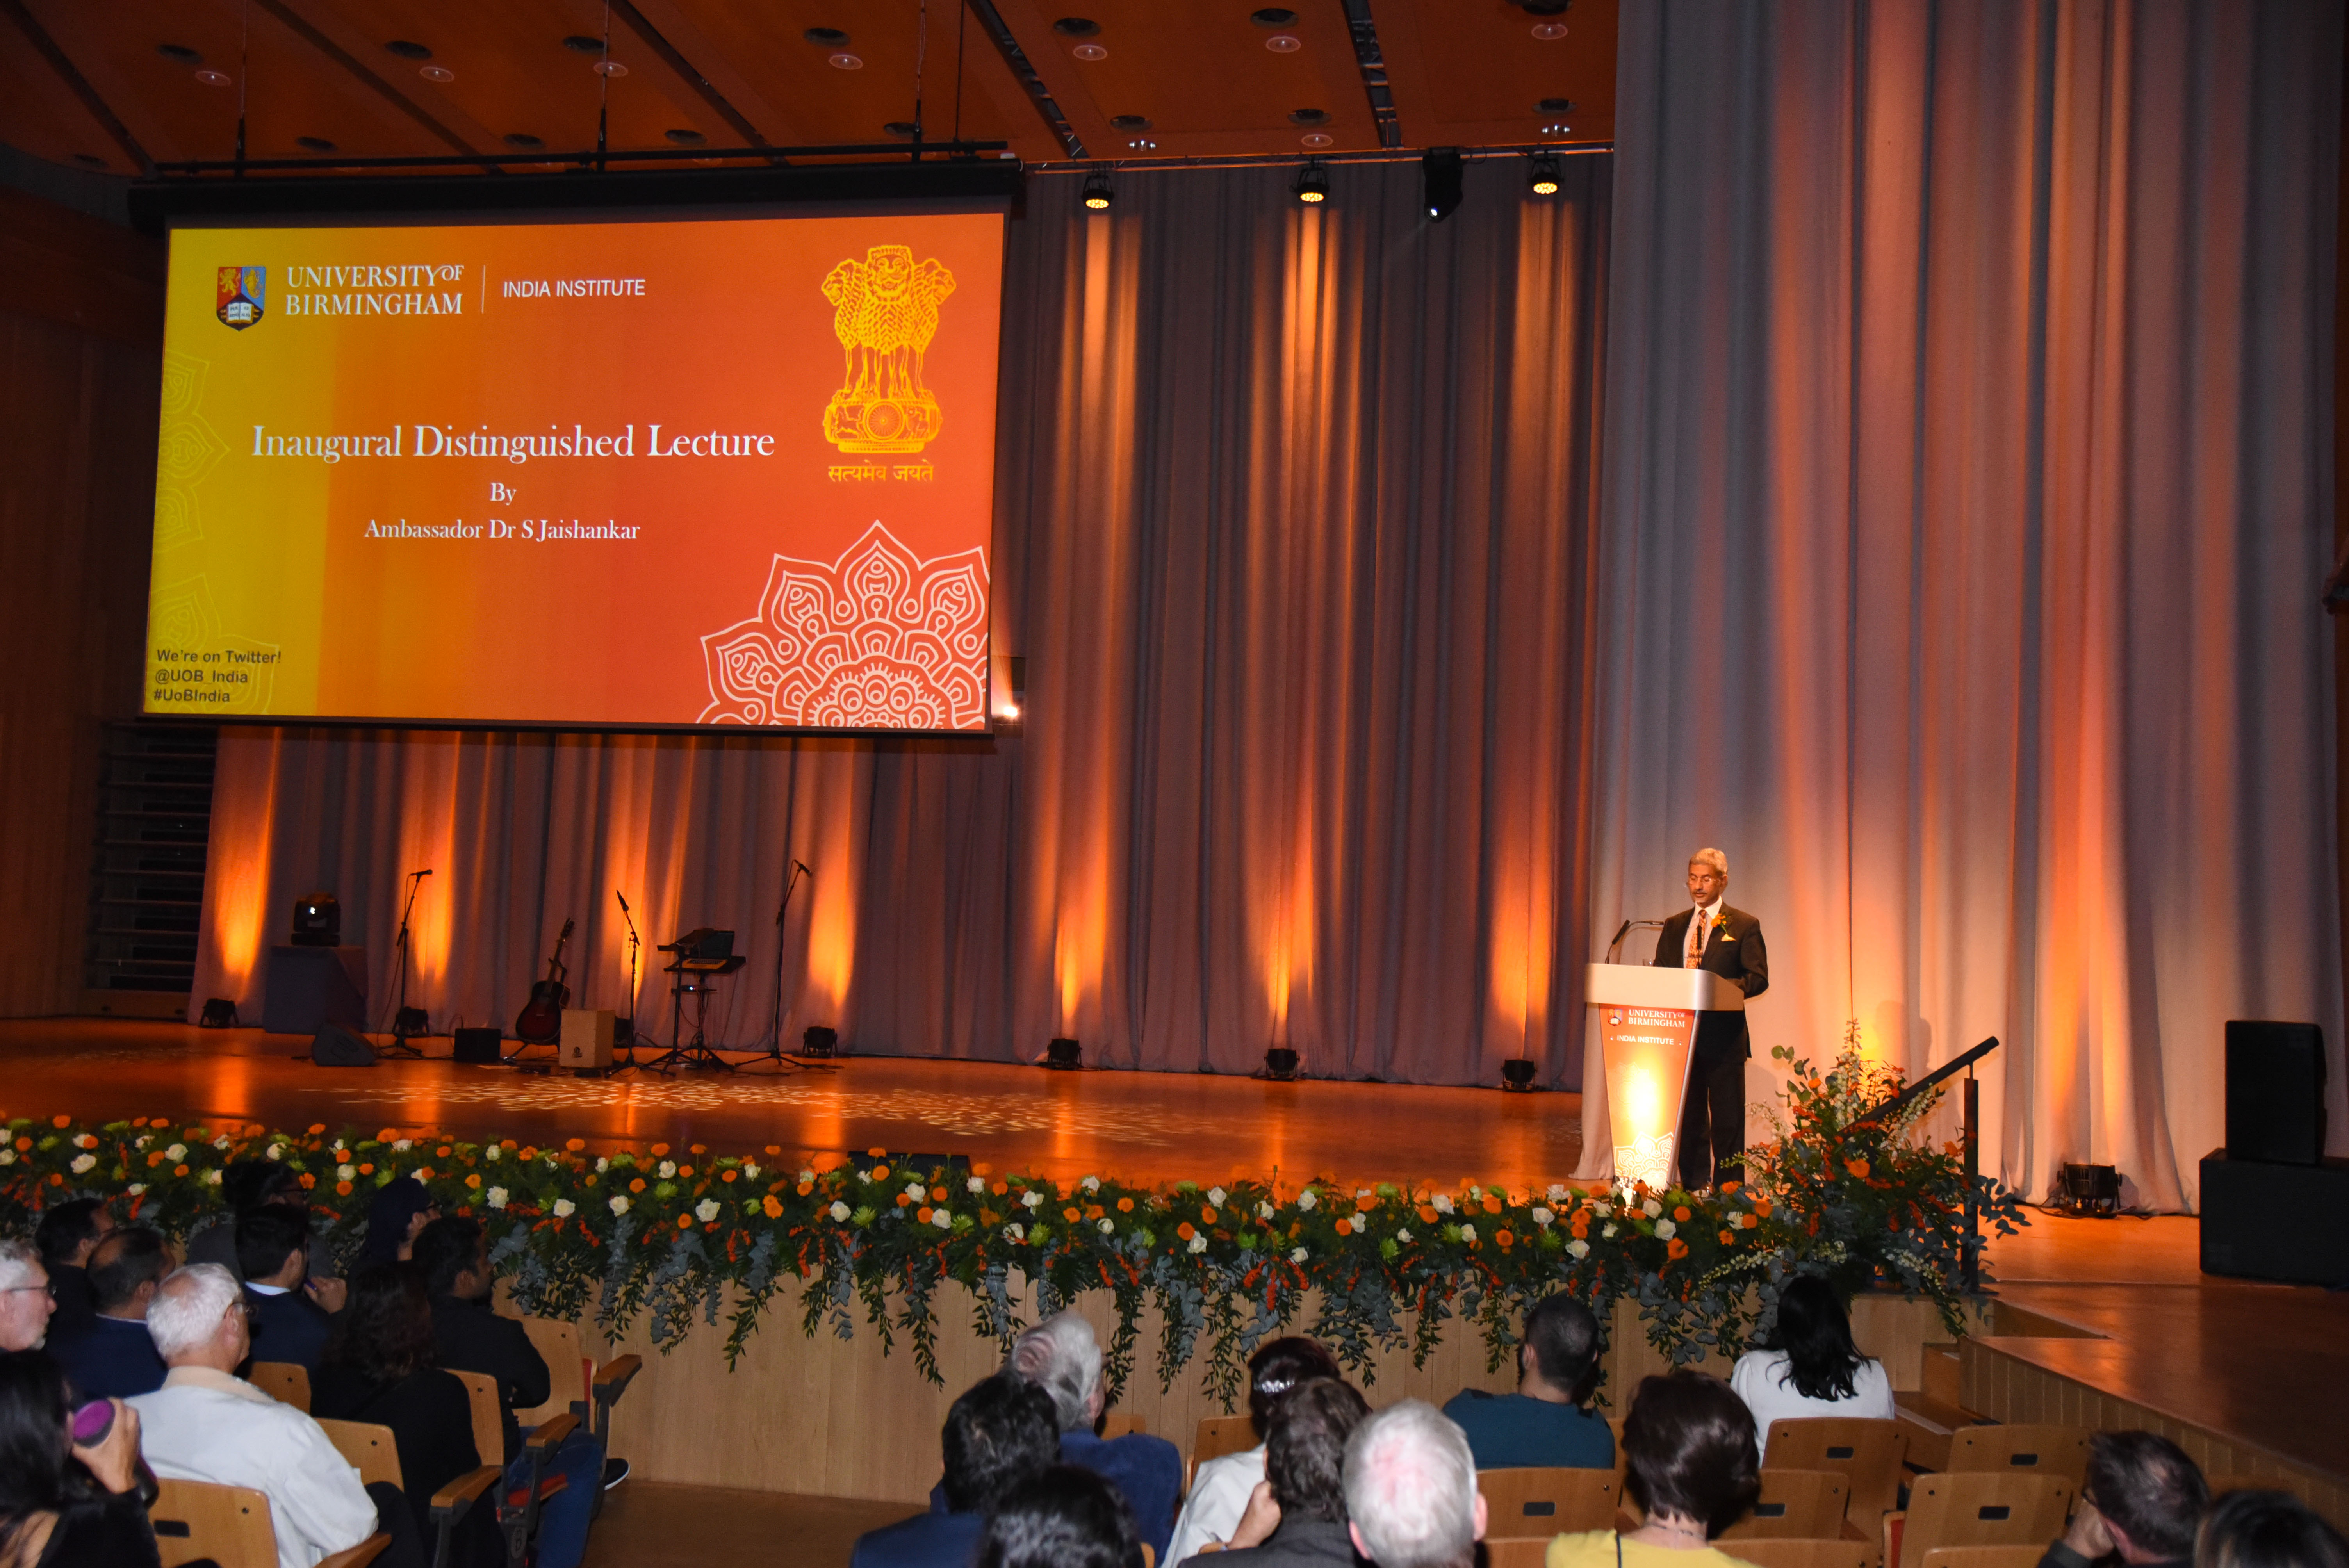 Dr Jaishankar on stage at the inaugural guest lecture in the Bramall concert hall